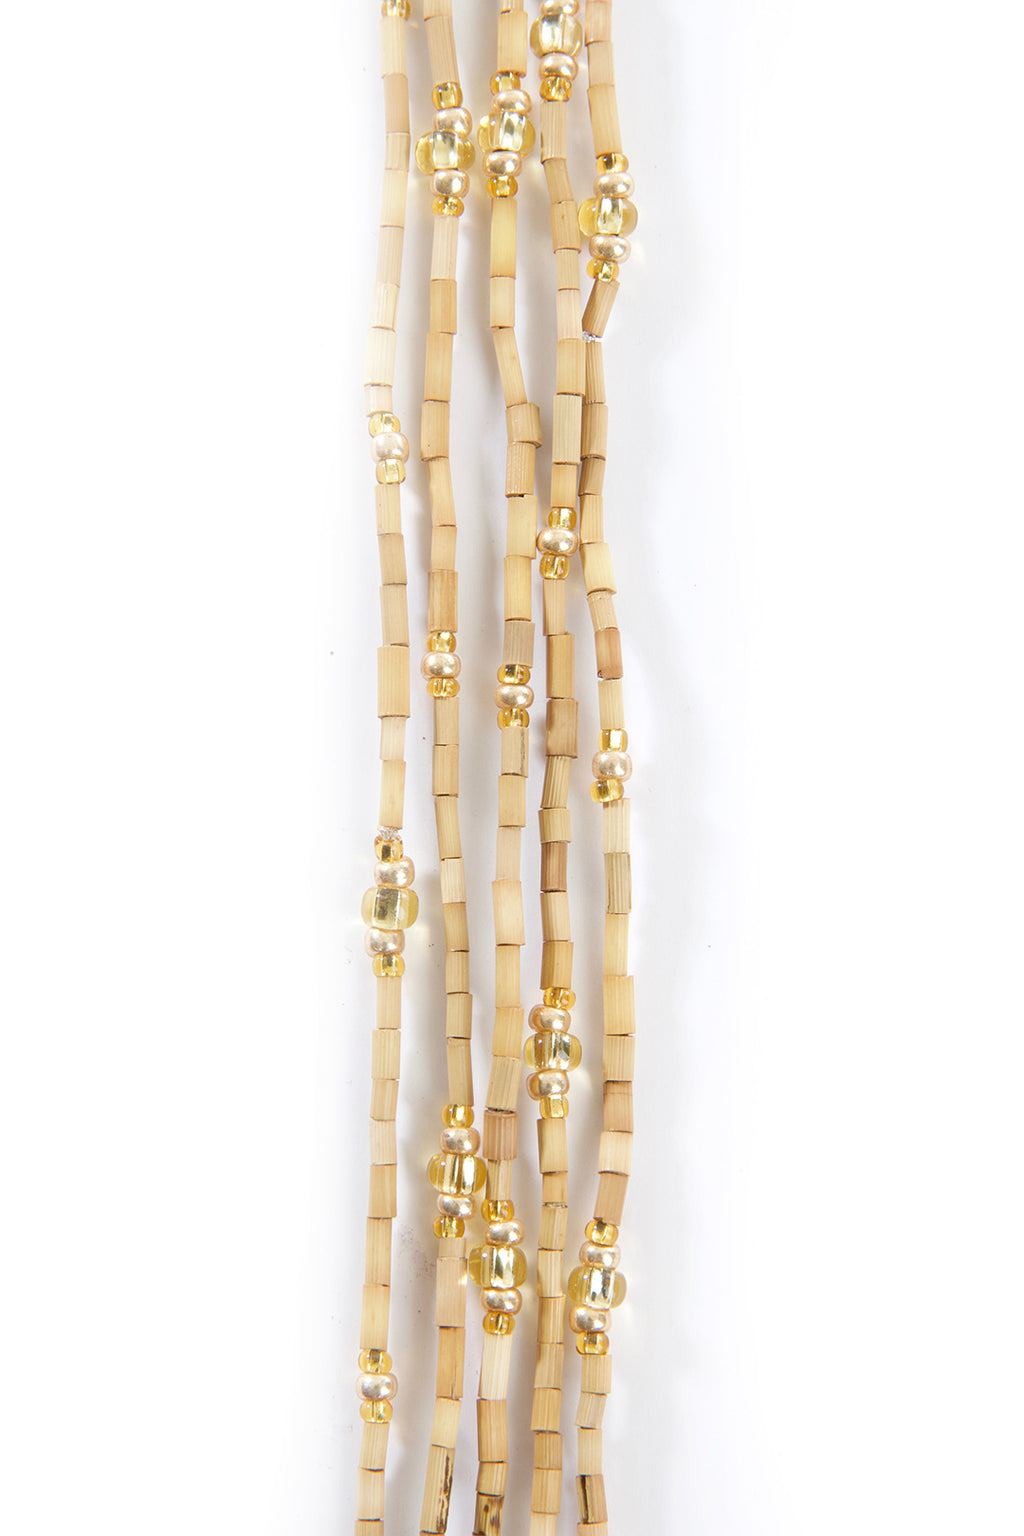 Set/5 Wheat 26" Zulugrass Single Strands from The Leakey Collection Default Title